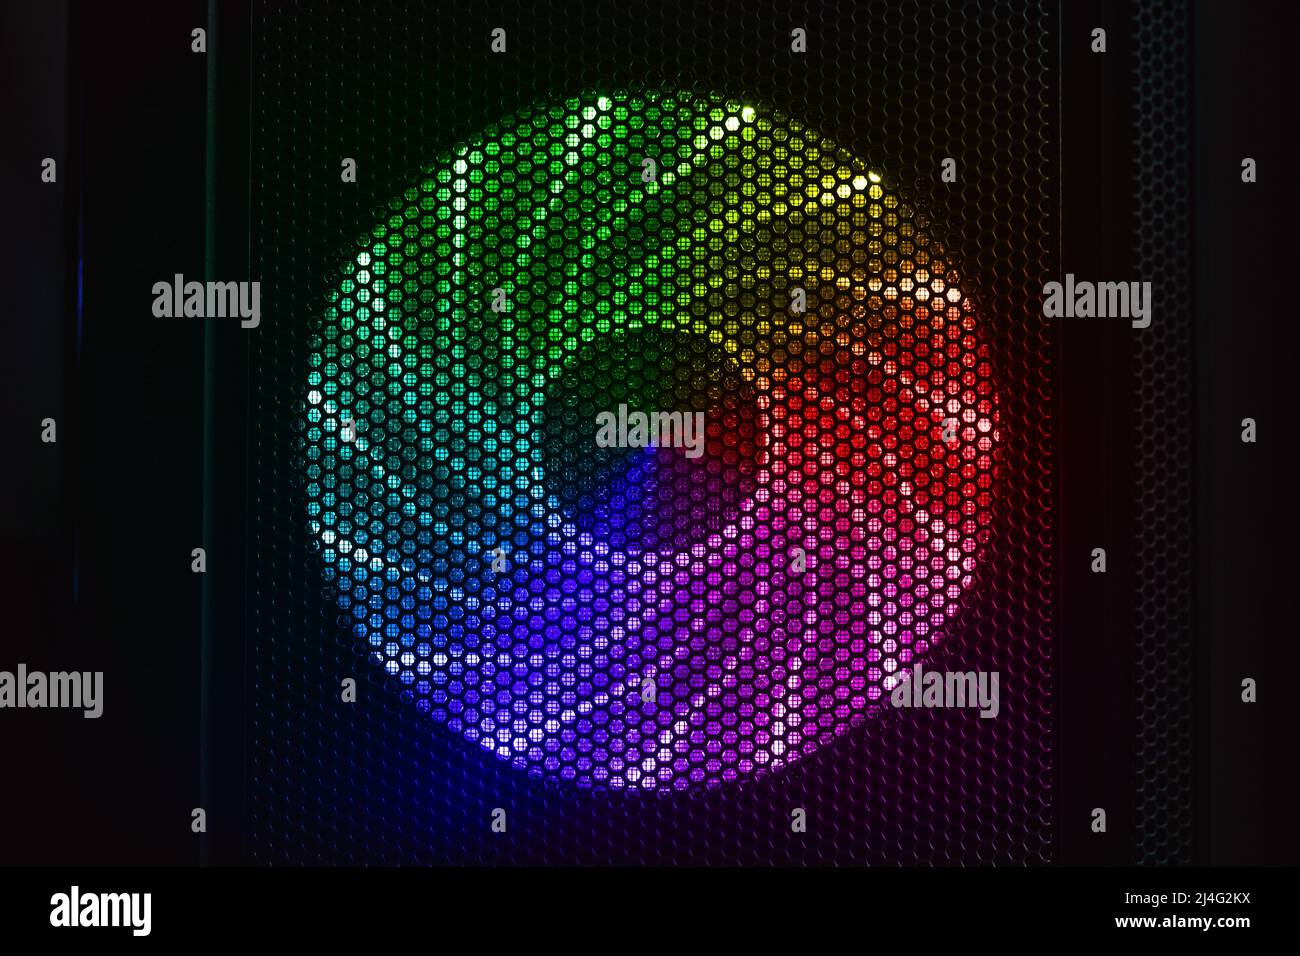 LED lights illuminated PC cooler fan glows with colorful rainbow pattern in dark desktop case, front view Stock Photo